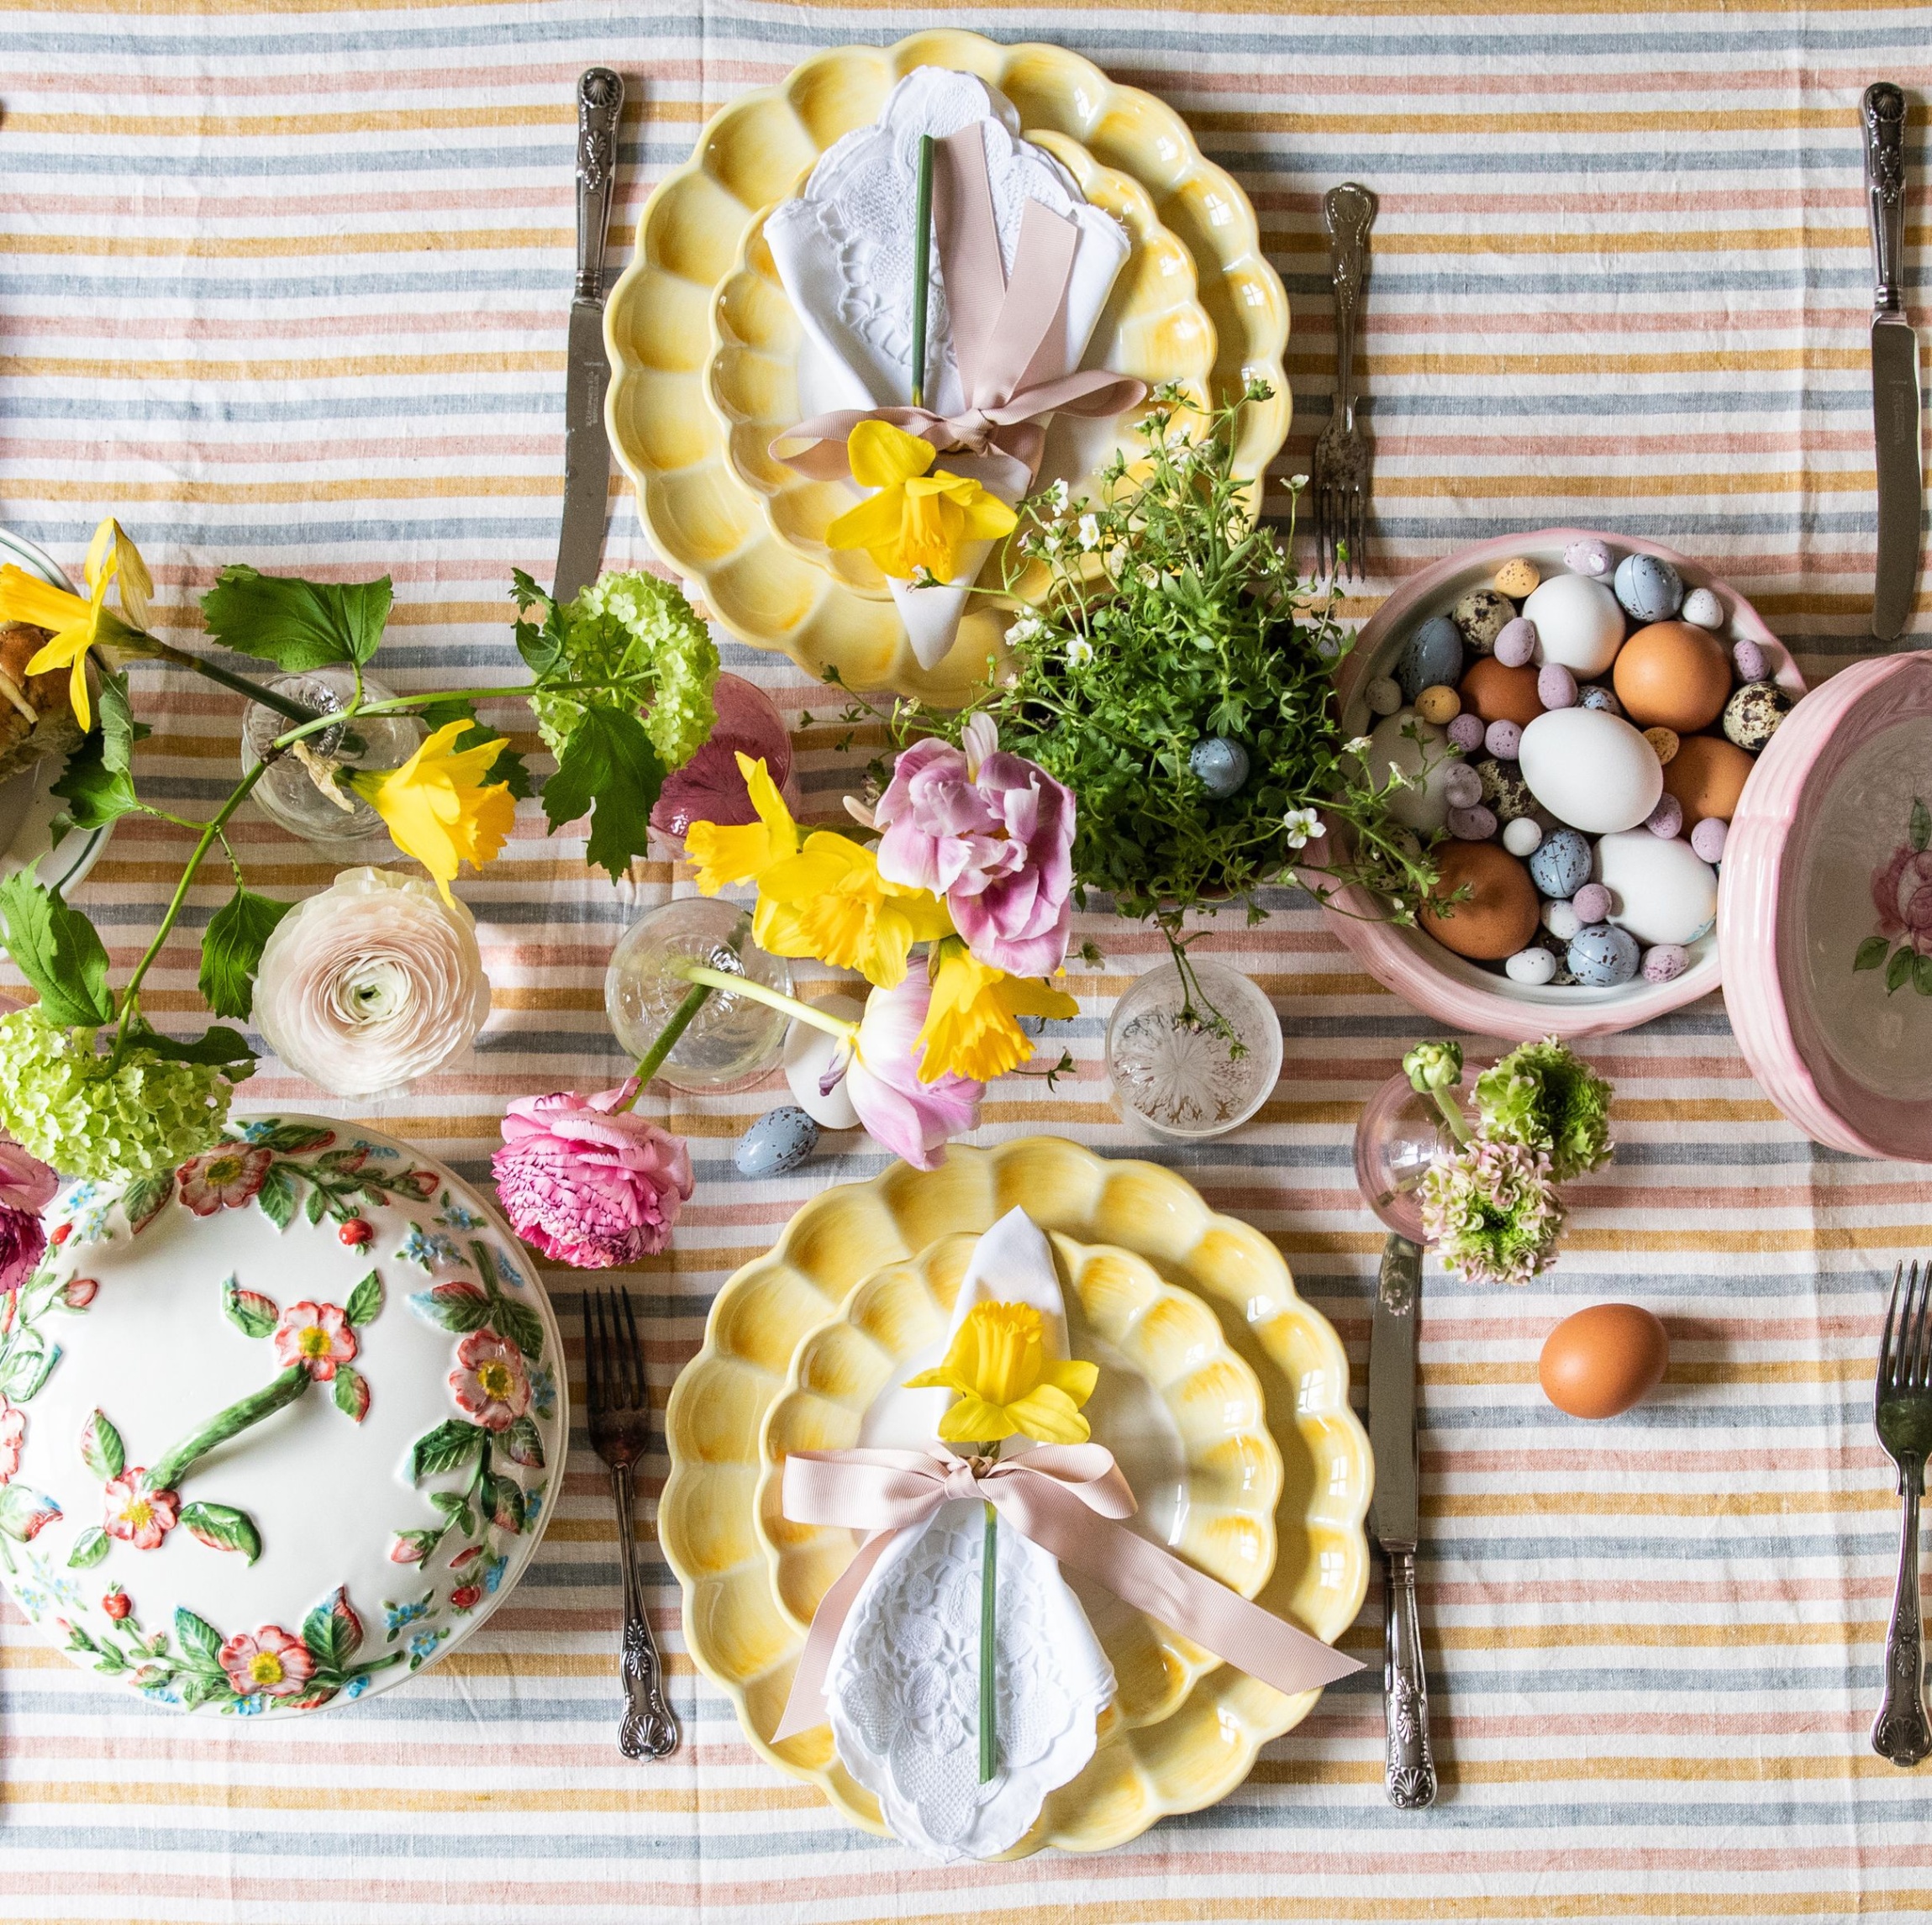 Spruce Up Your Easter Table With These Fun And Festive Decor Ideas